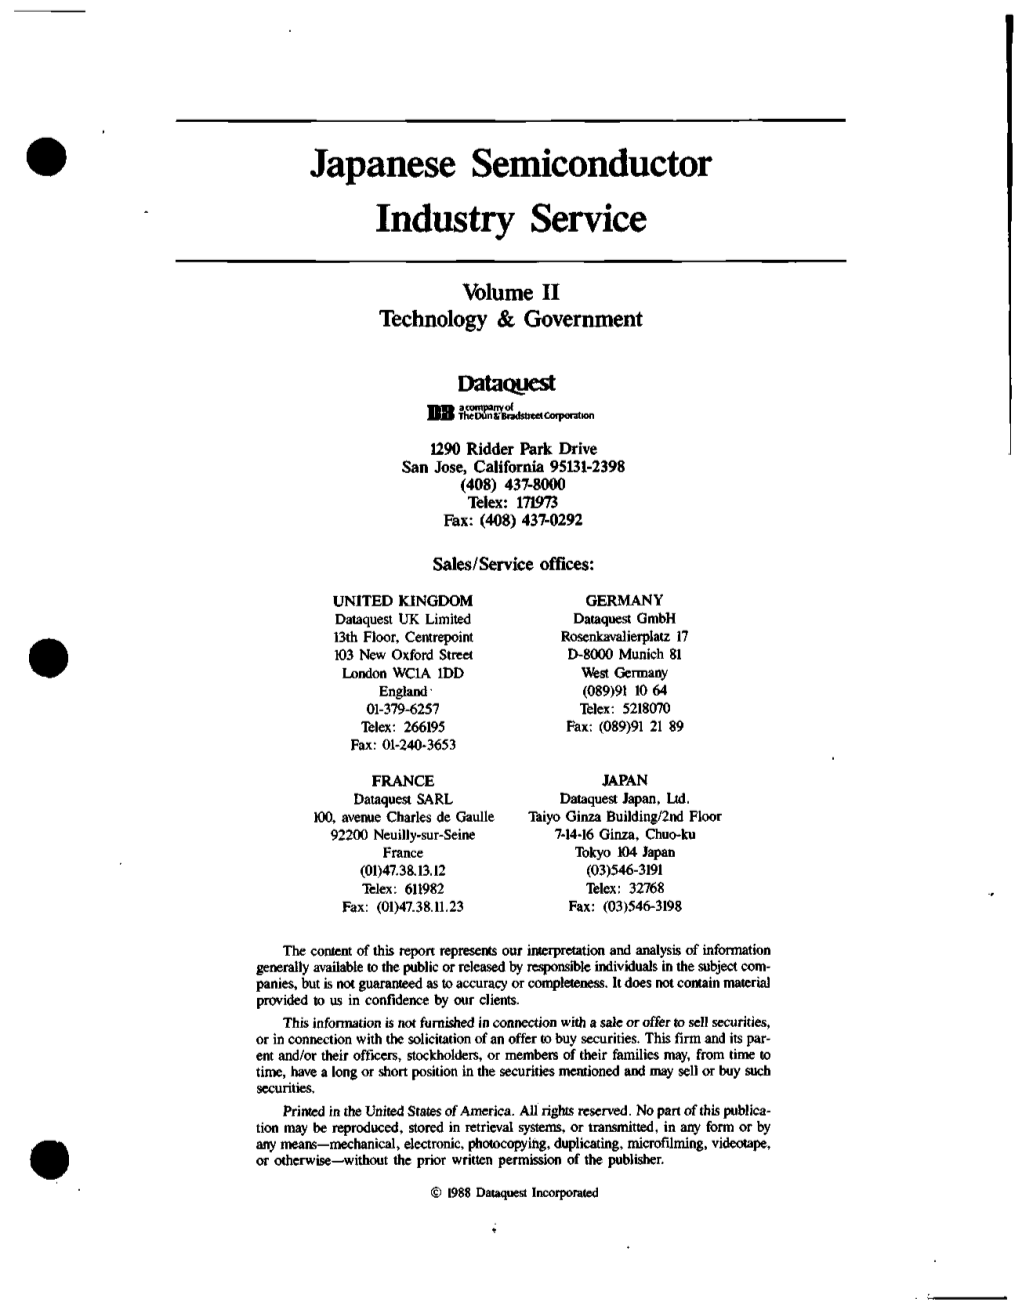 Japanese Semiconductor Industry Service